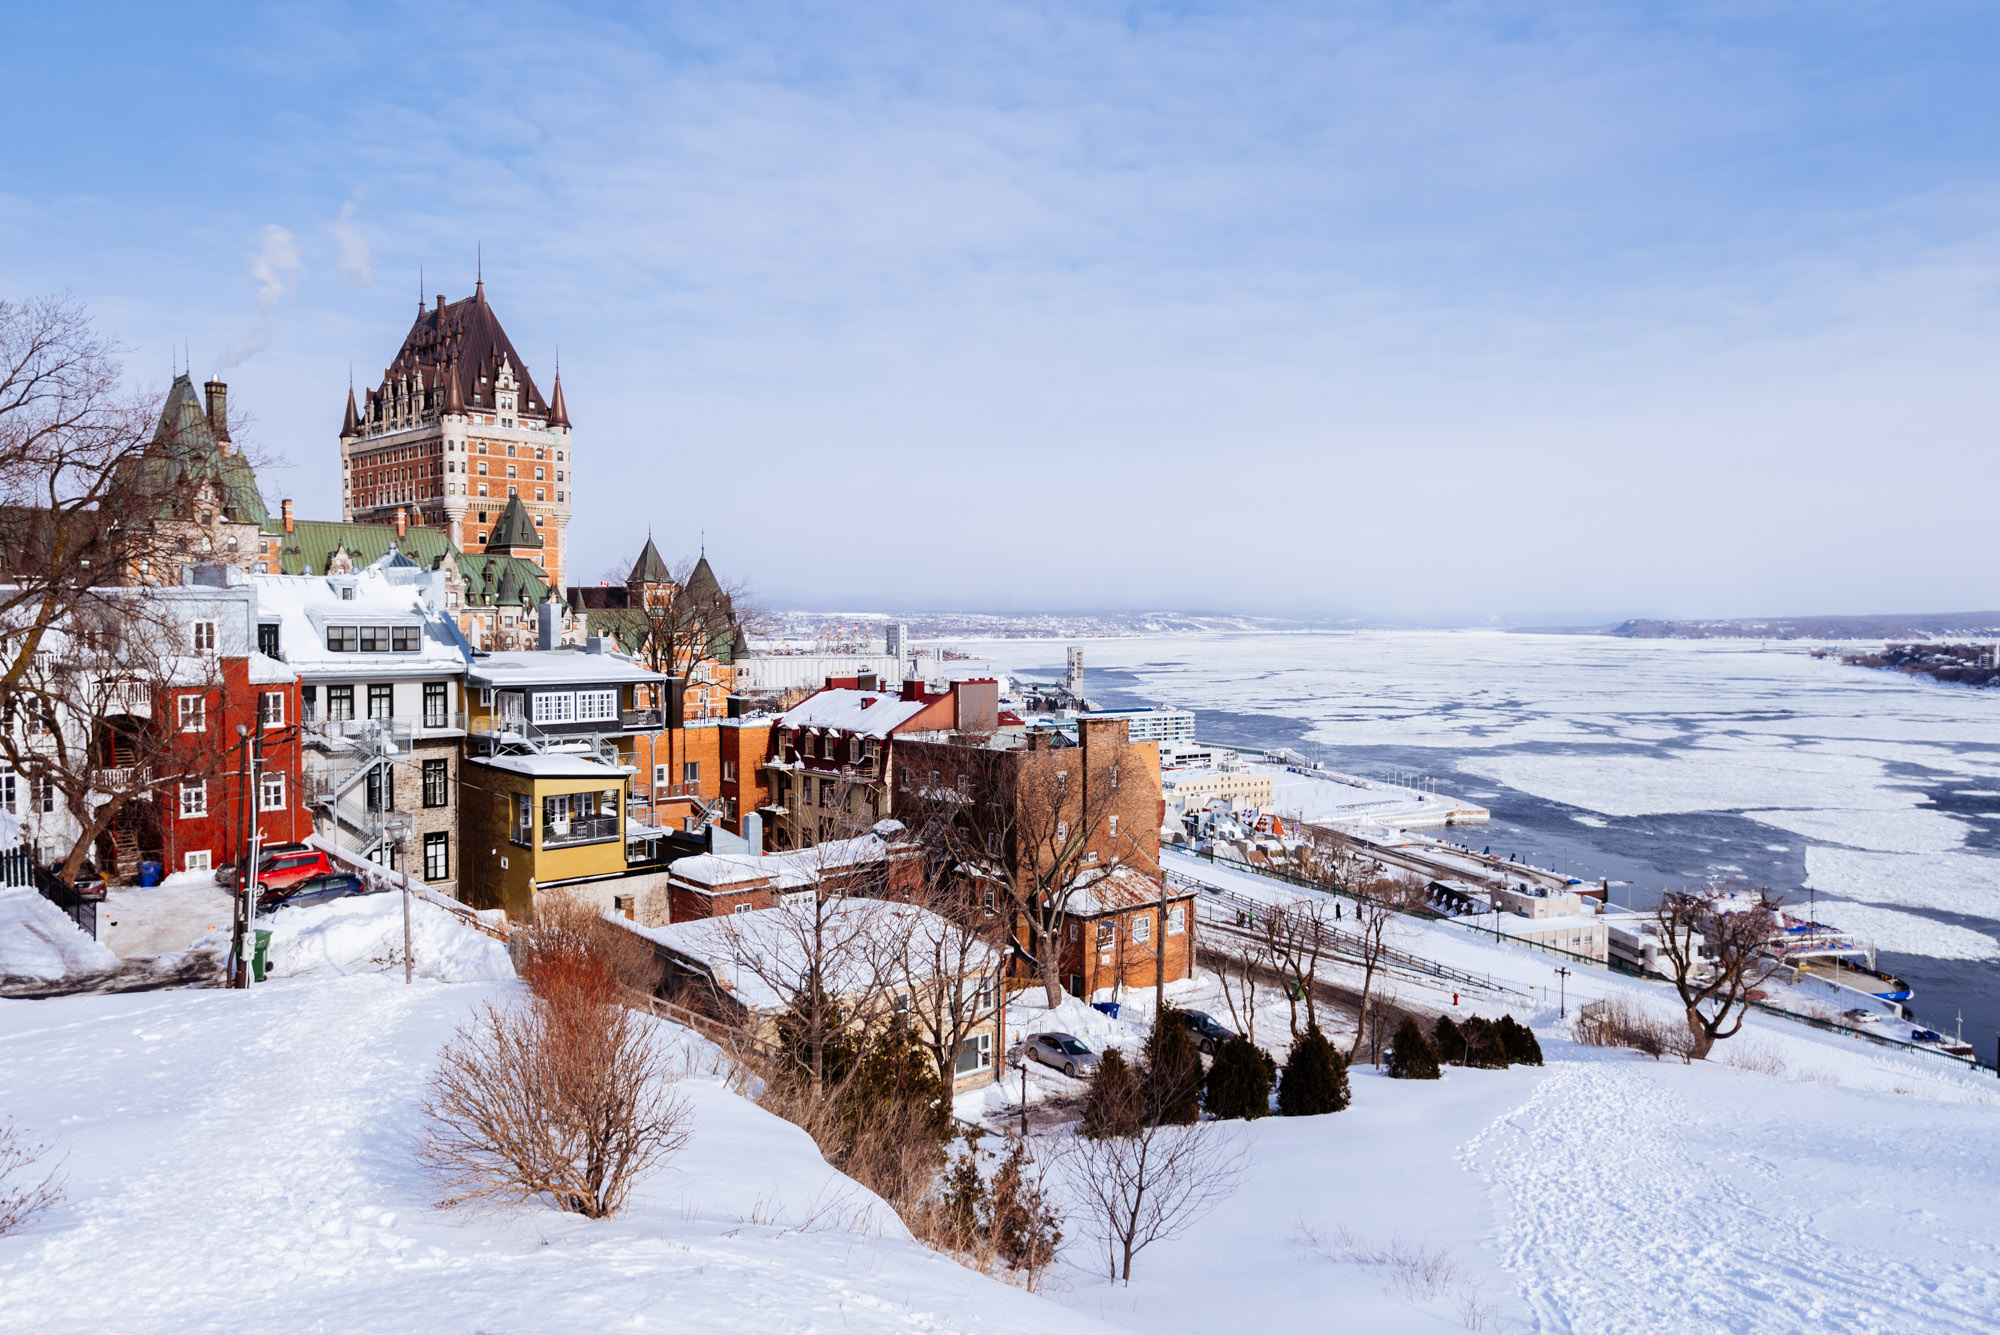 Jeff On The Road - Travel - Quebec City Winter Photos - All photos are under Copyright  © 2017 Jeff Frenette Photography / dezjeff. To use the photos, please contact me at dezjeff@me.com.